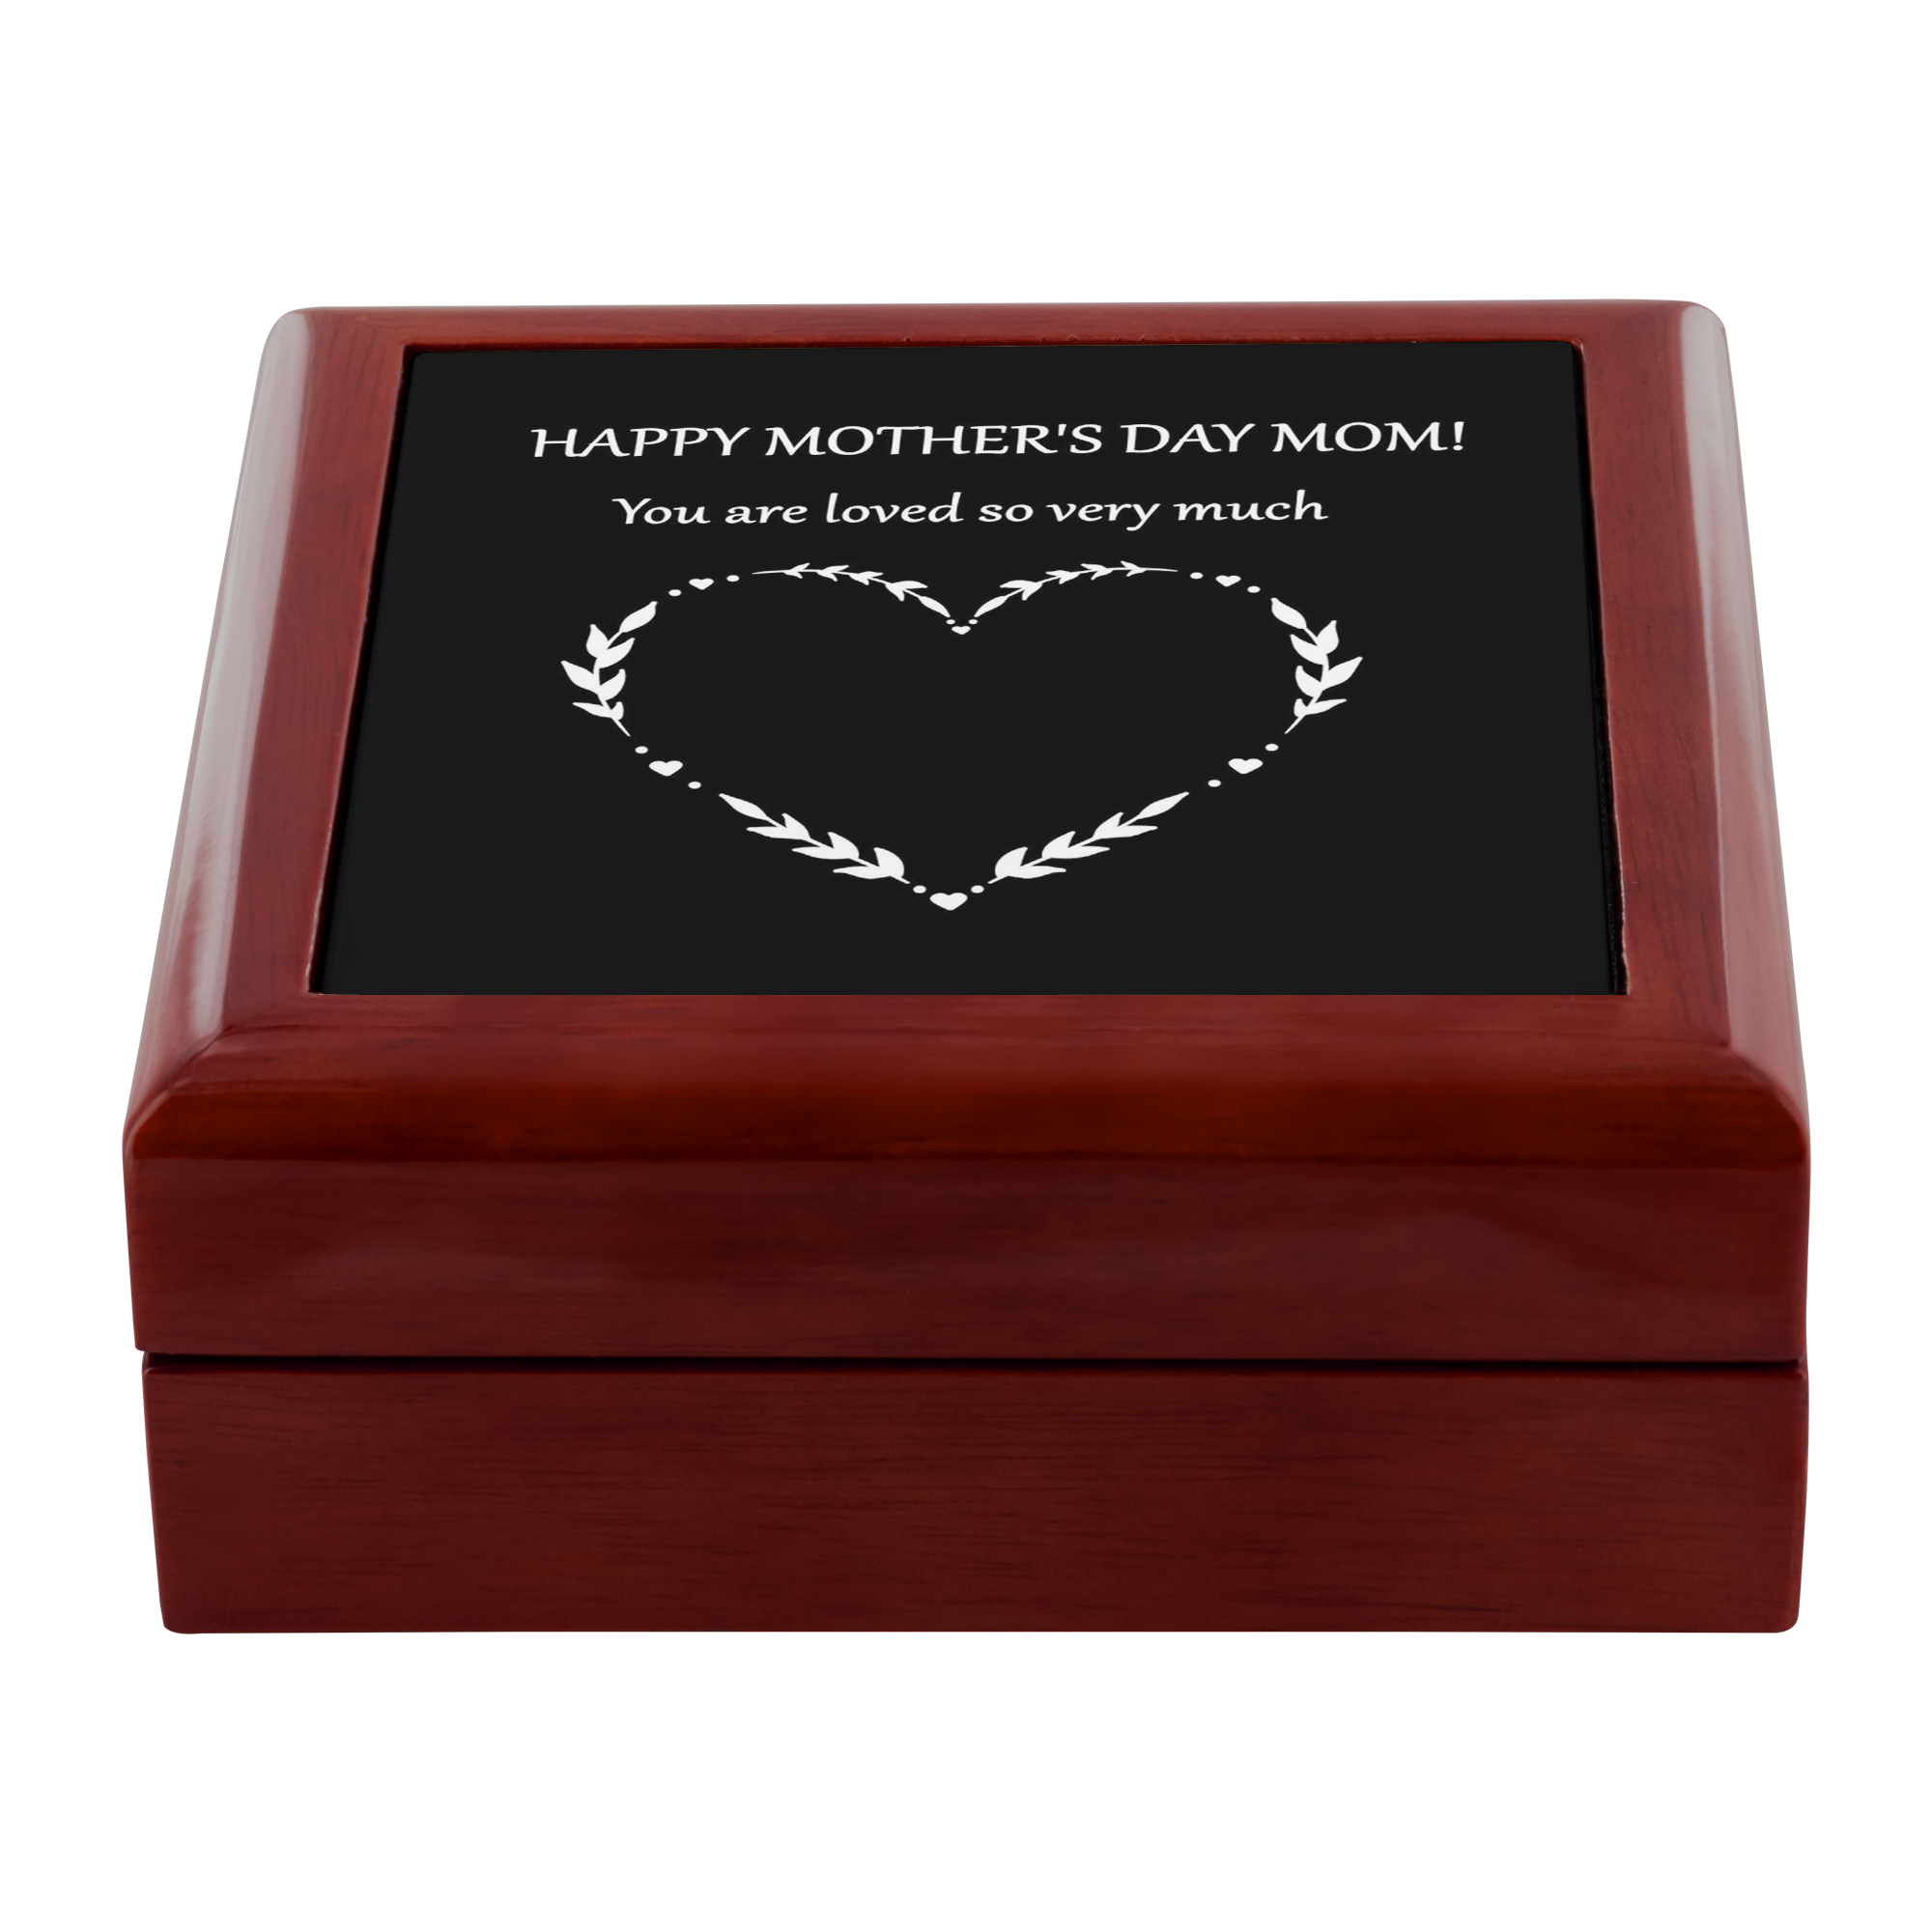 md21 Mother's Day Genuine Wood Jewelry Box